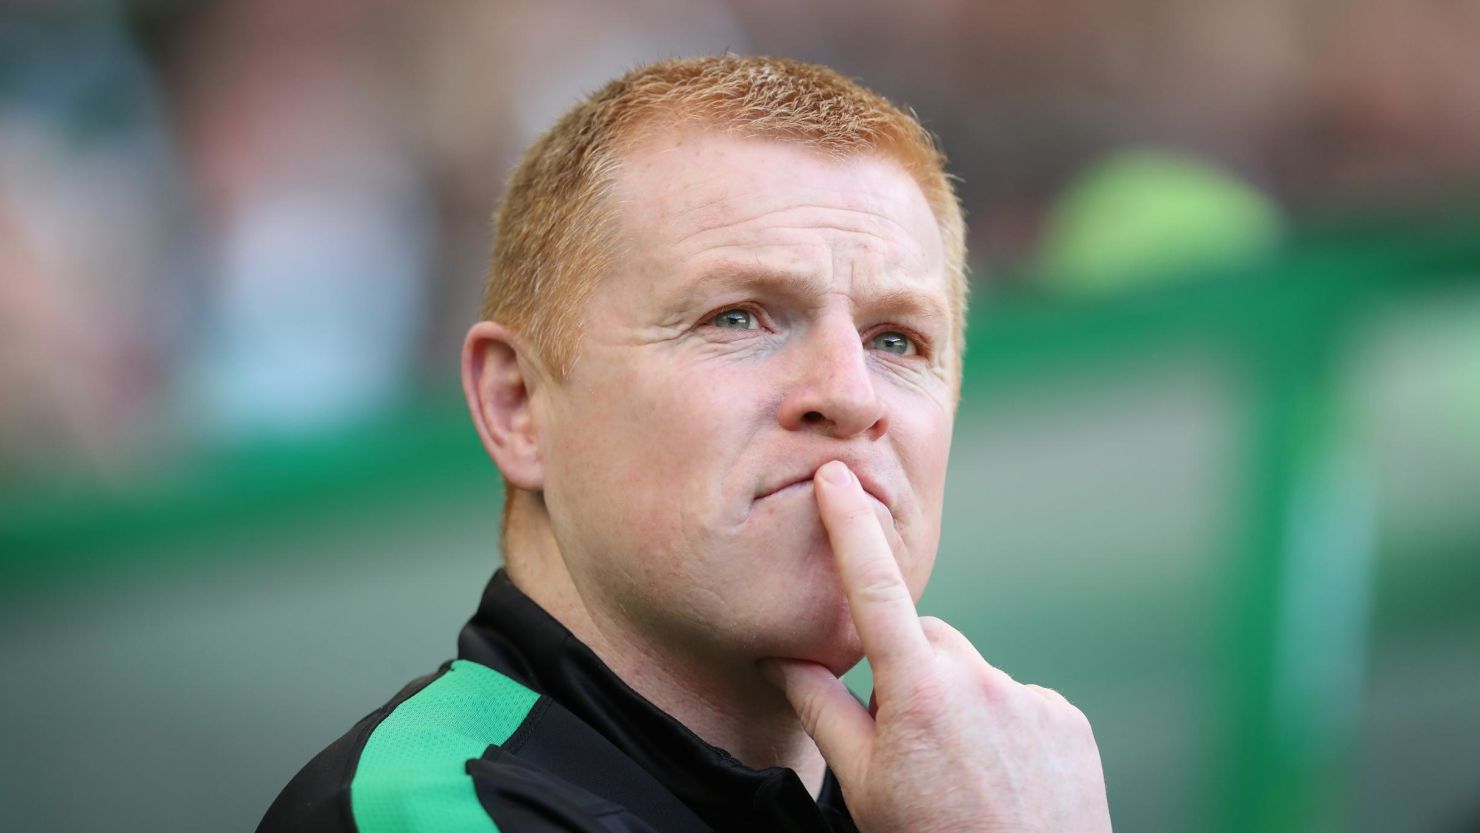 Hibernian manager Neil Lennon was struck by a coin during Hearts game. 